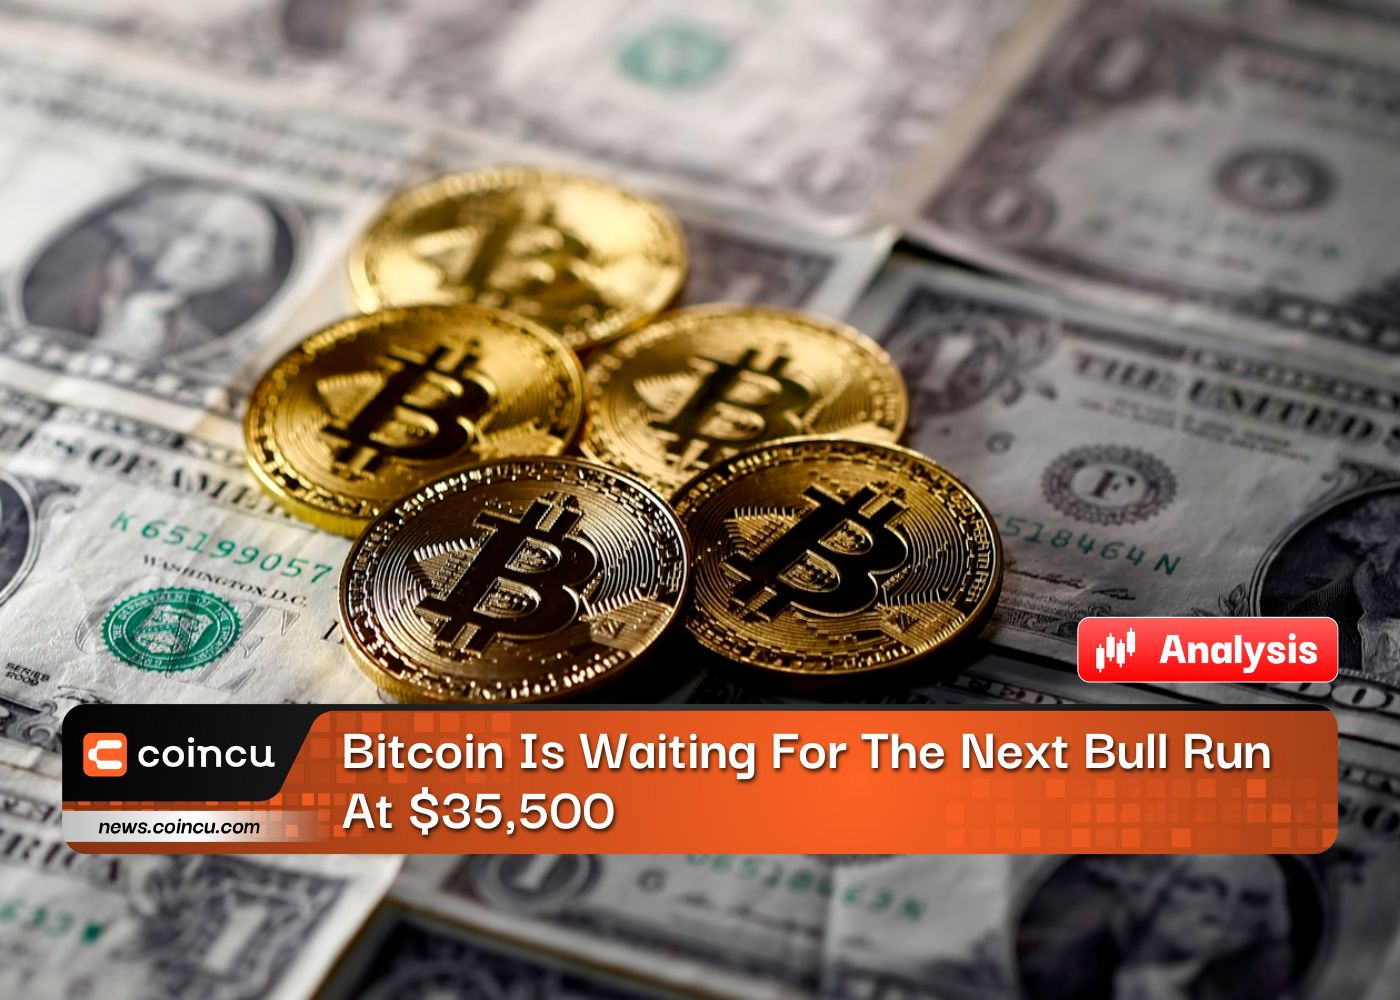 Bitcoin Is Waiting For The Next Bull Run At $35,500